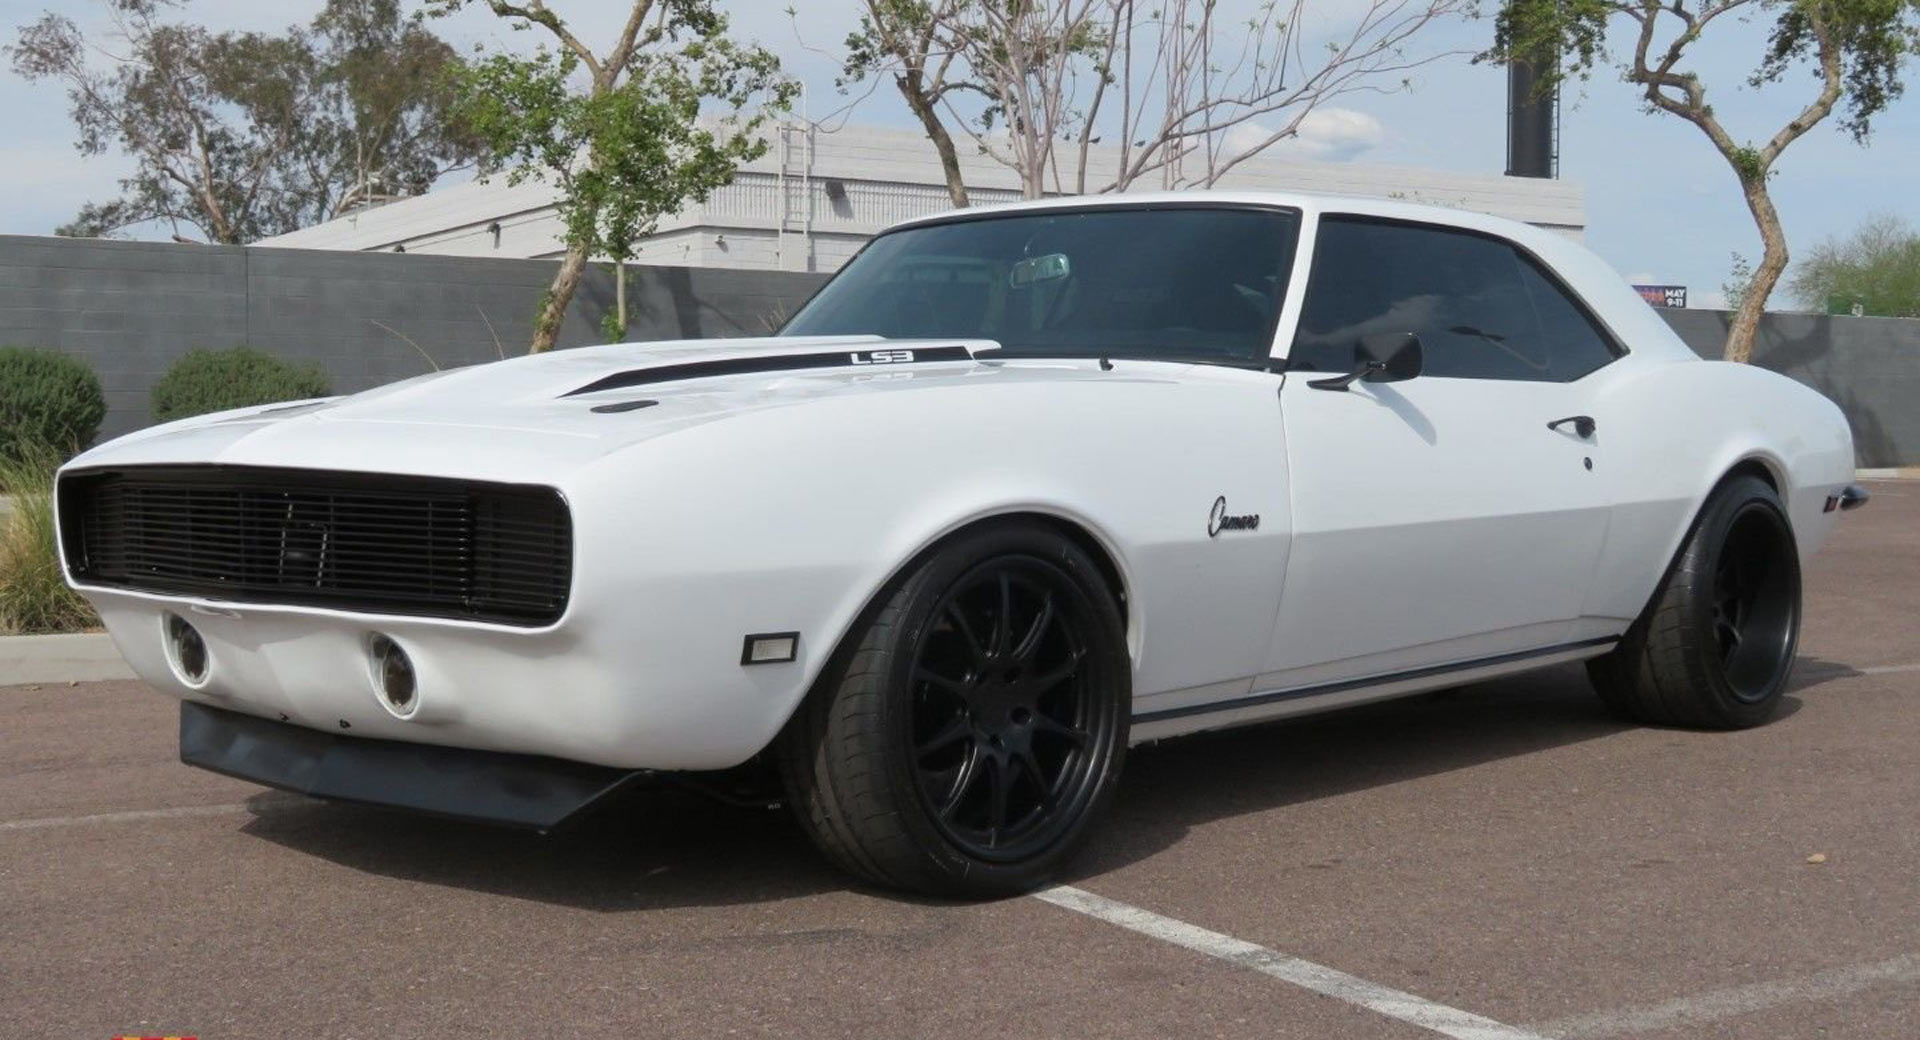 Someone Dropped Over $100k To Mod This '68 Camaro, Could Be Yours